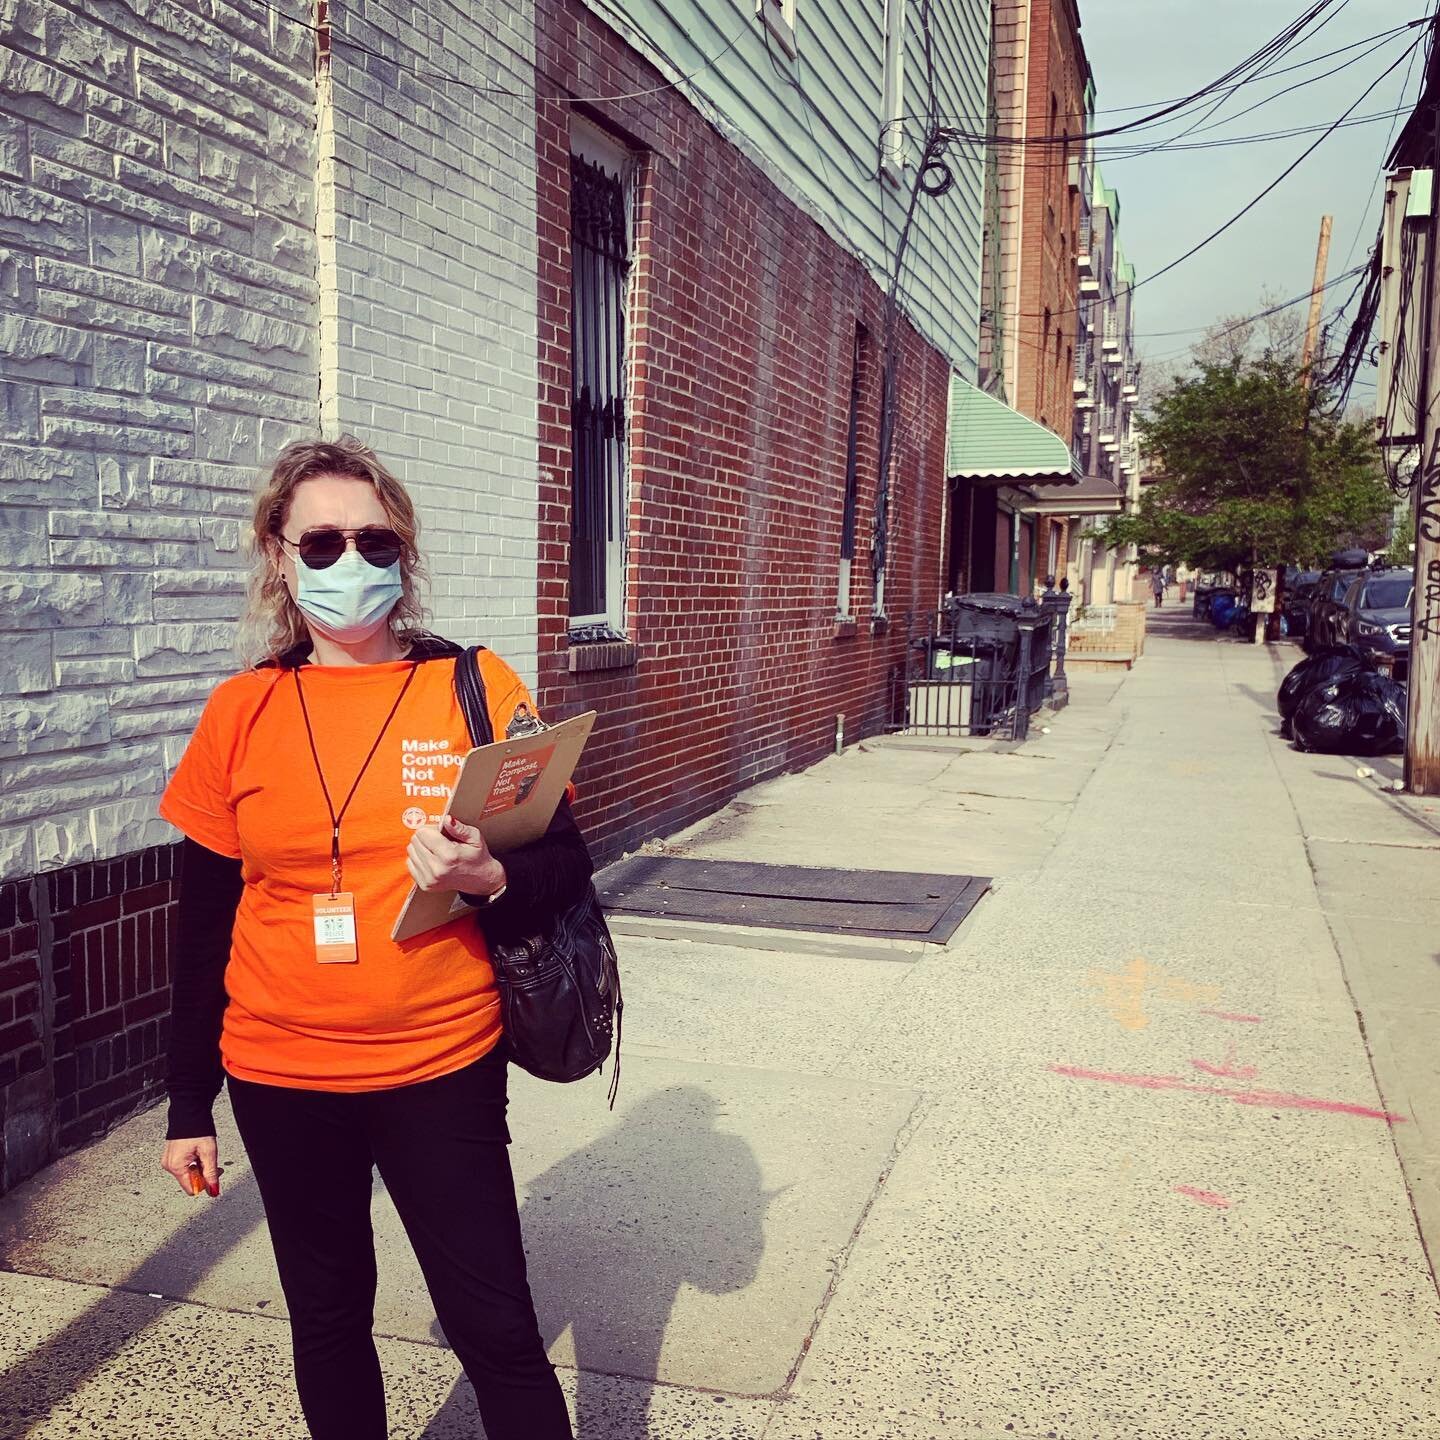 Instyle mag says tangerine is the new trend color&hellip;Always ahead of the trends, this outreach volunteer would love to talk to you about the DSNY curbside compost program 😎And remember people- composting is always in style! 🍃
.
.
.
#brownbins #